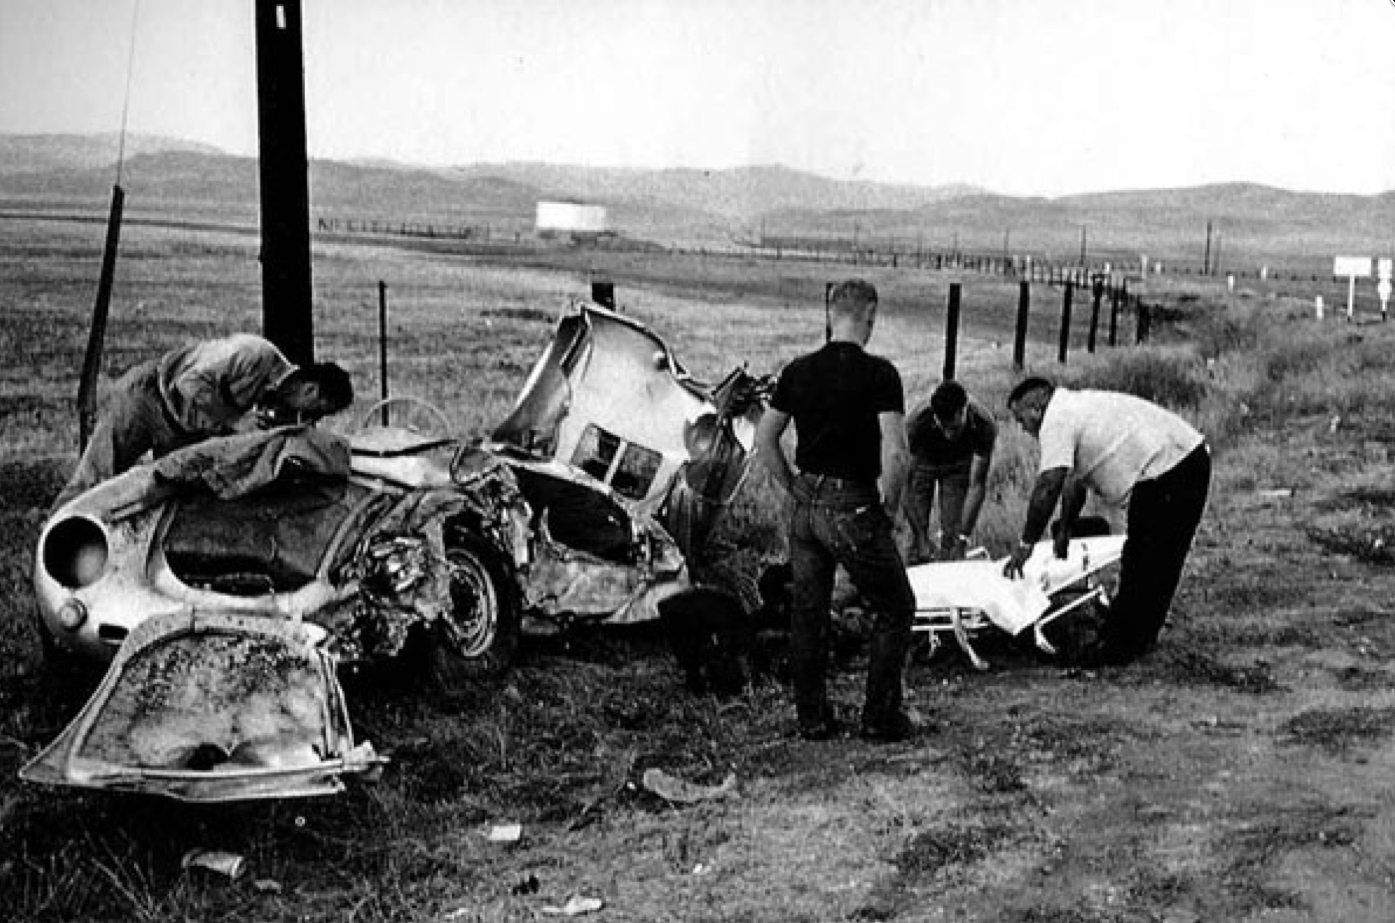 The automobile crash that killed James Dean on Sept. 30, 1955 in